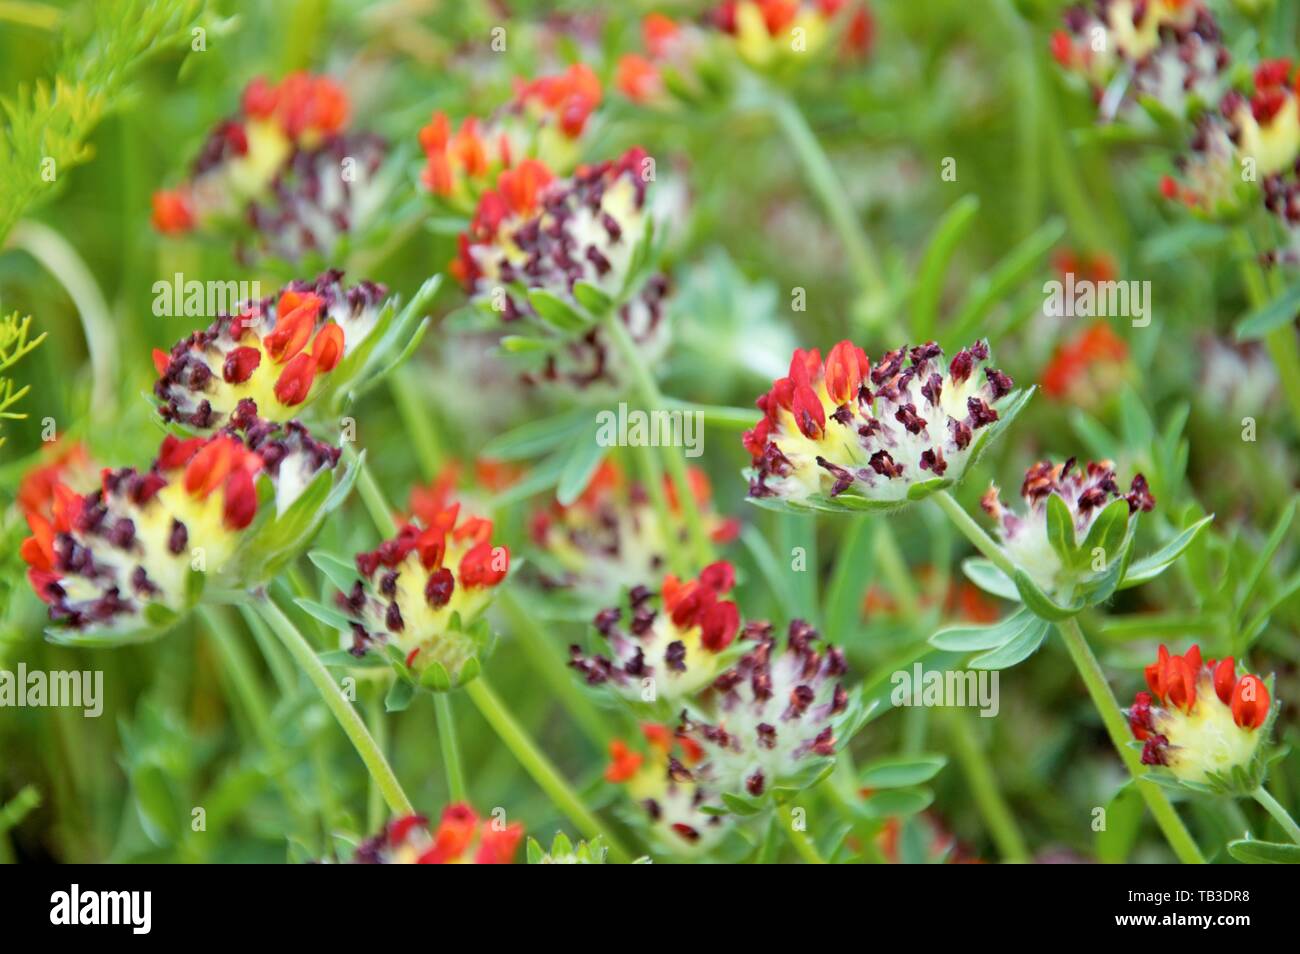 Mulit colored flowers of a kidney vetch plant in spring in a garden in Nijmegen the Netherlands Stock Photo